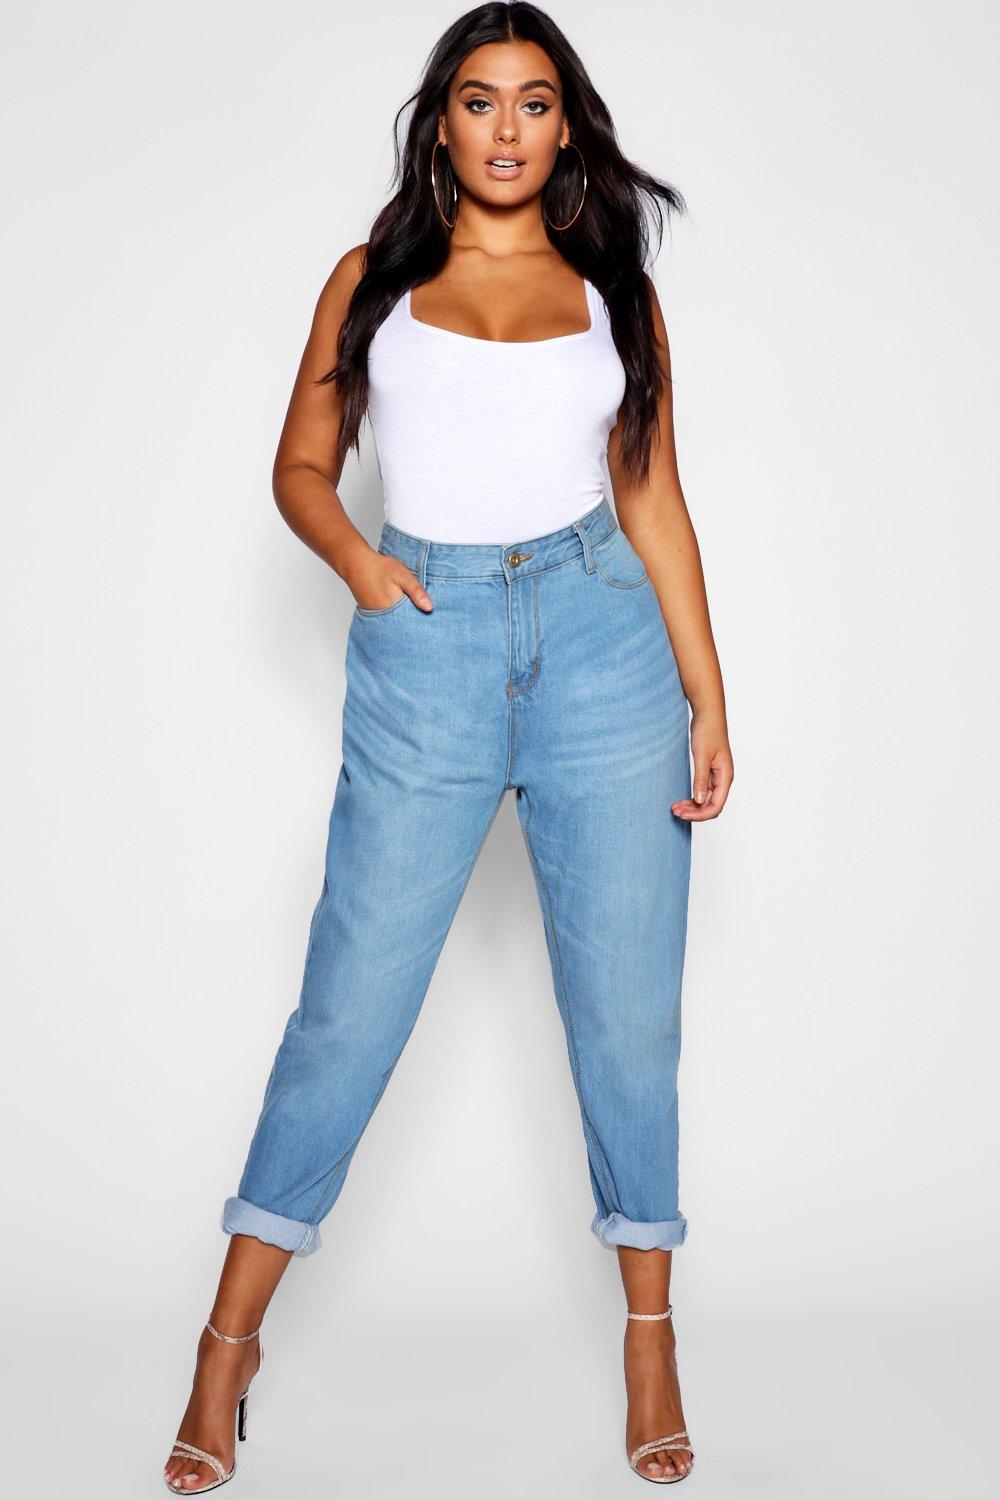 size 12 mom jeans